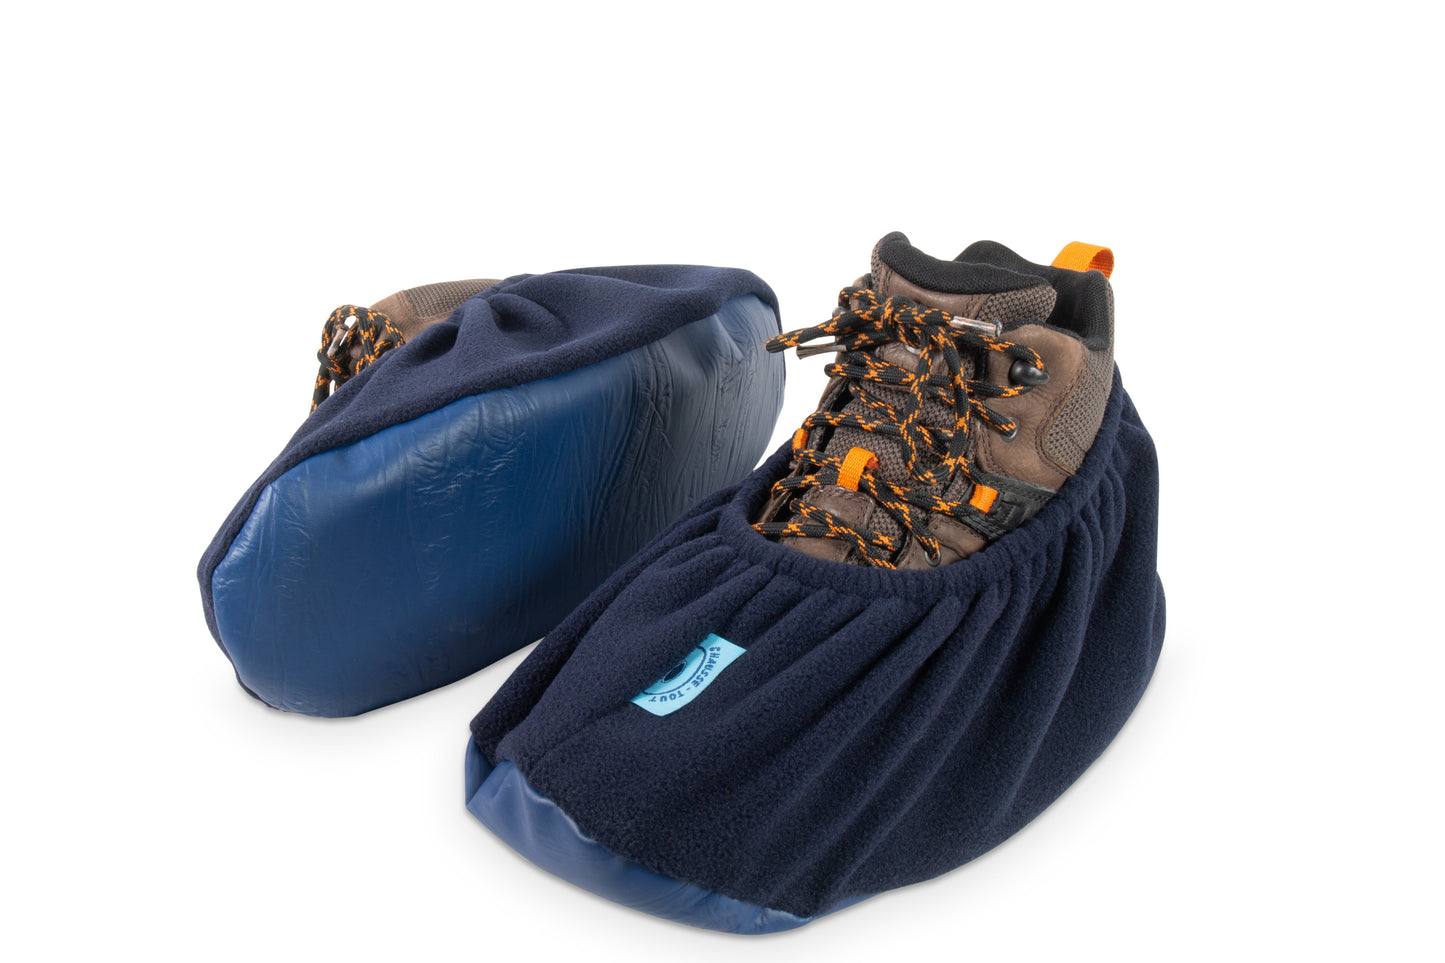 Home service shoe or boot covers, pro and Magikab series